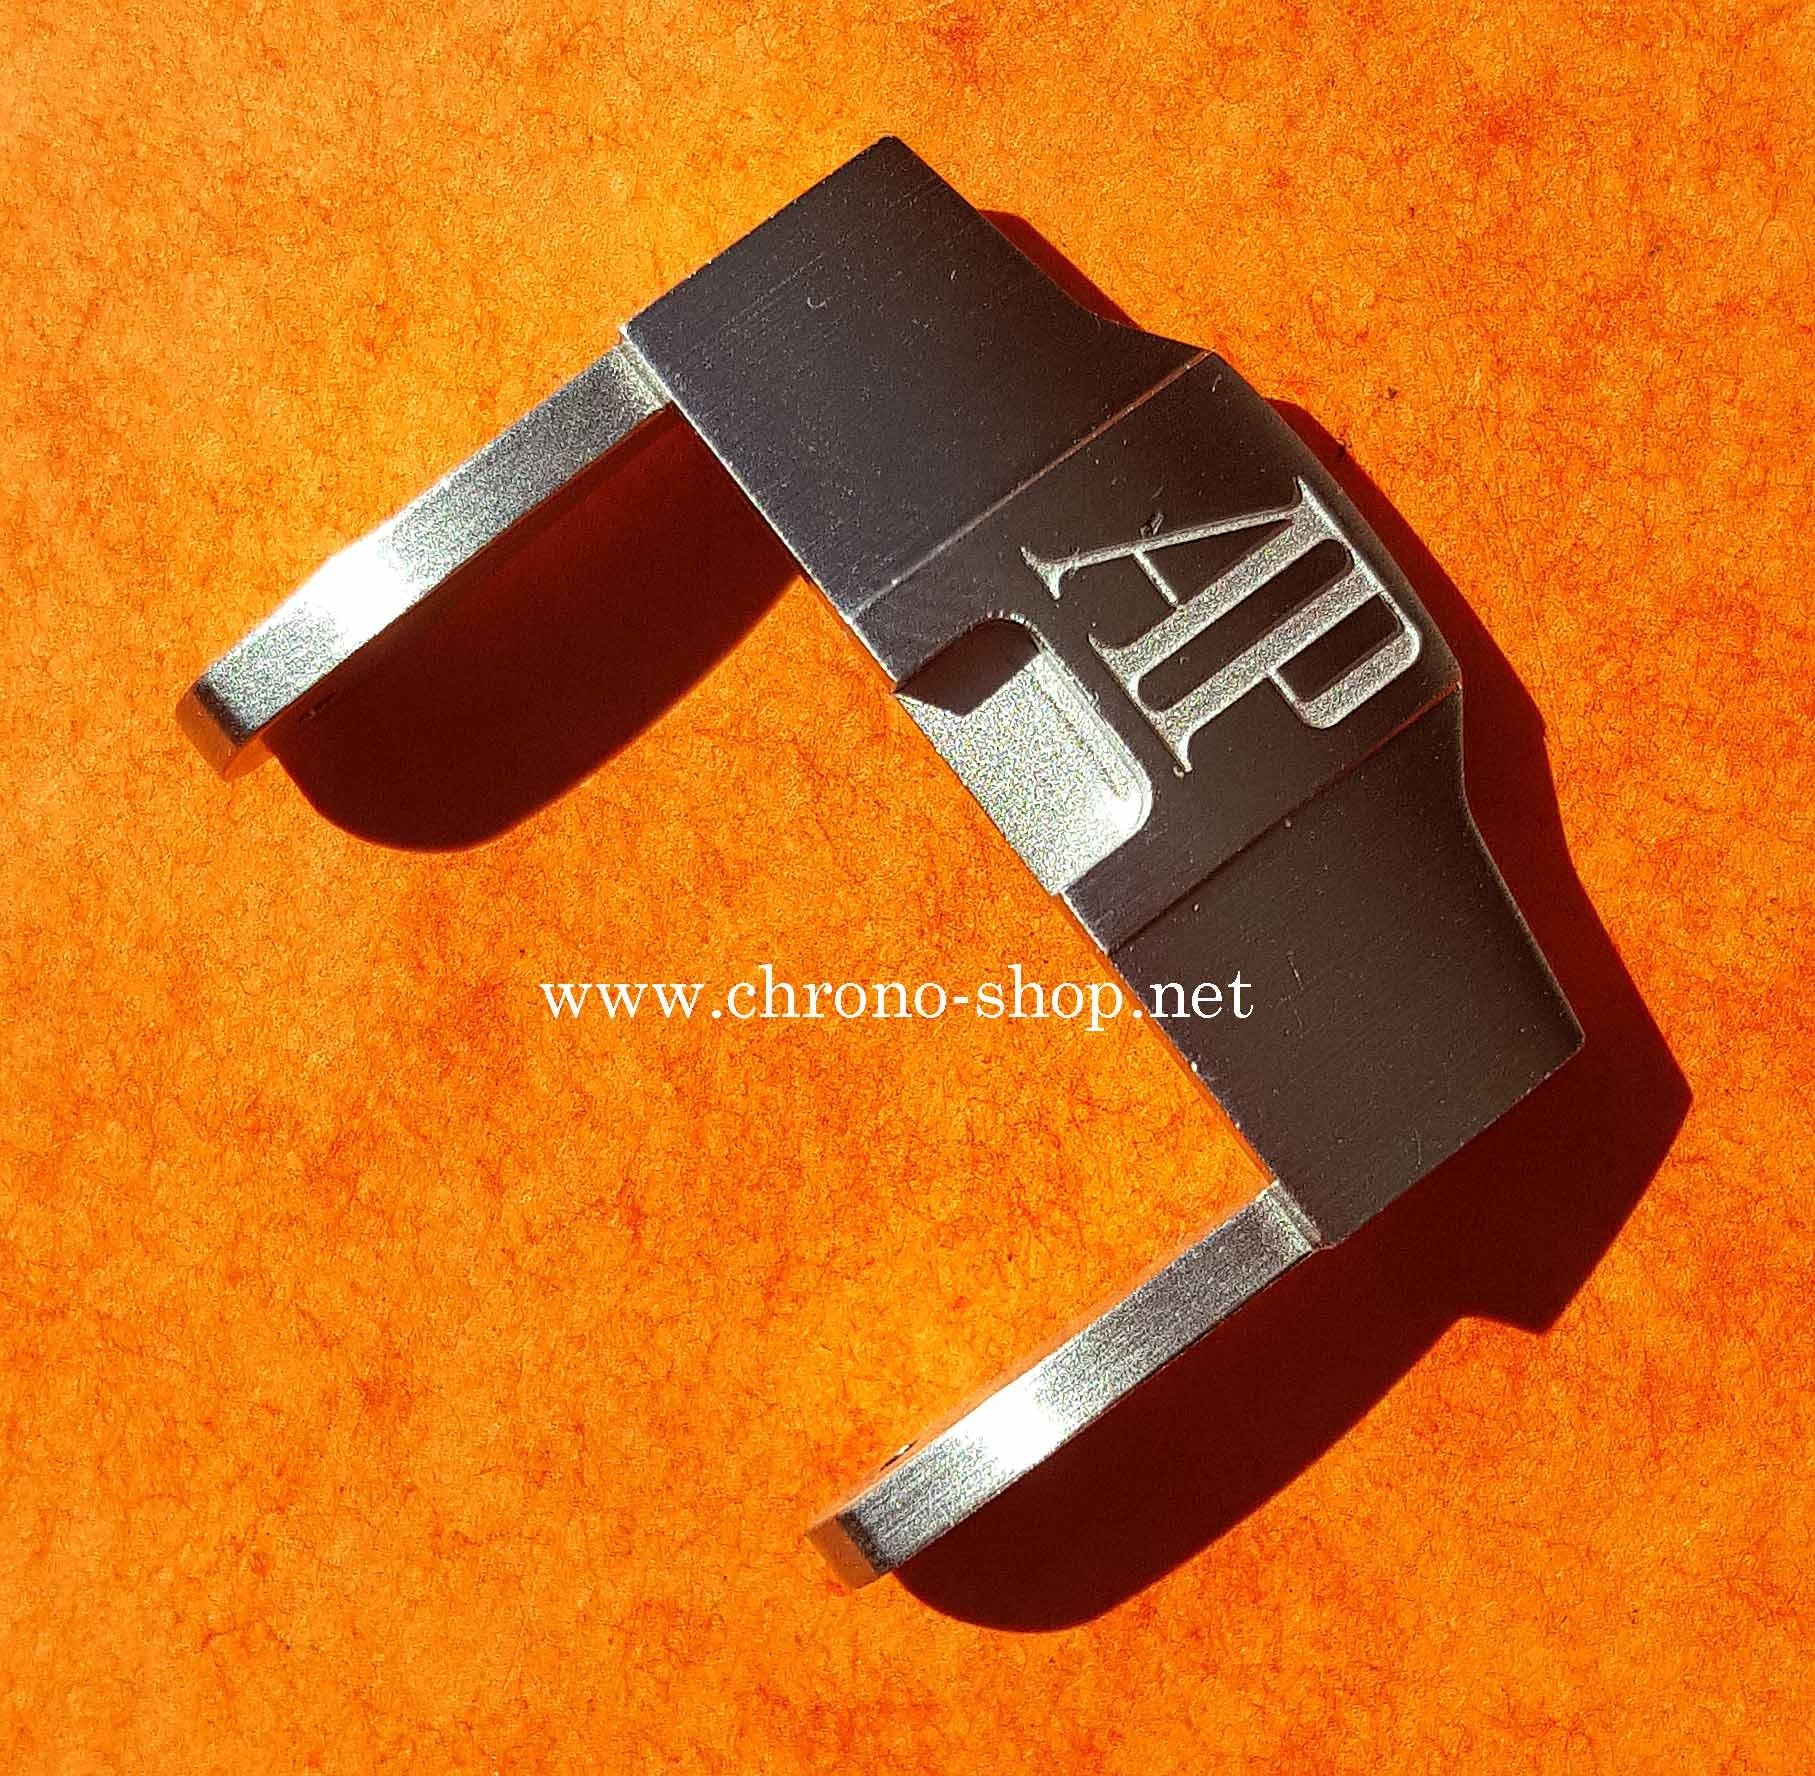 Details about   Audemars Piguet Royal Oak Offshore Stainless Steel Tang Buckle 24MM OEM 